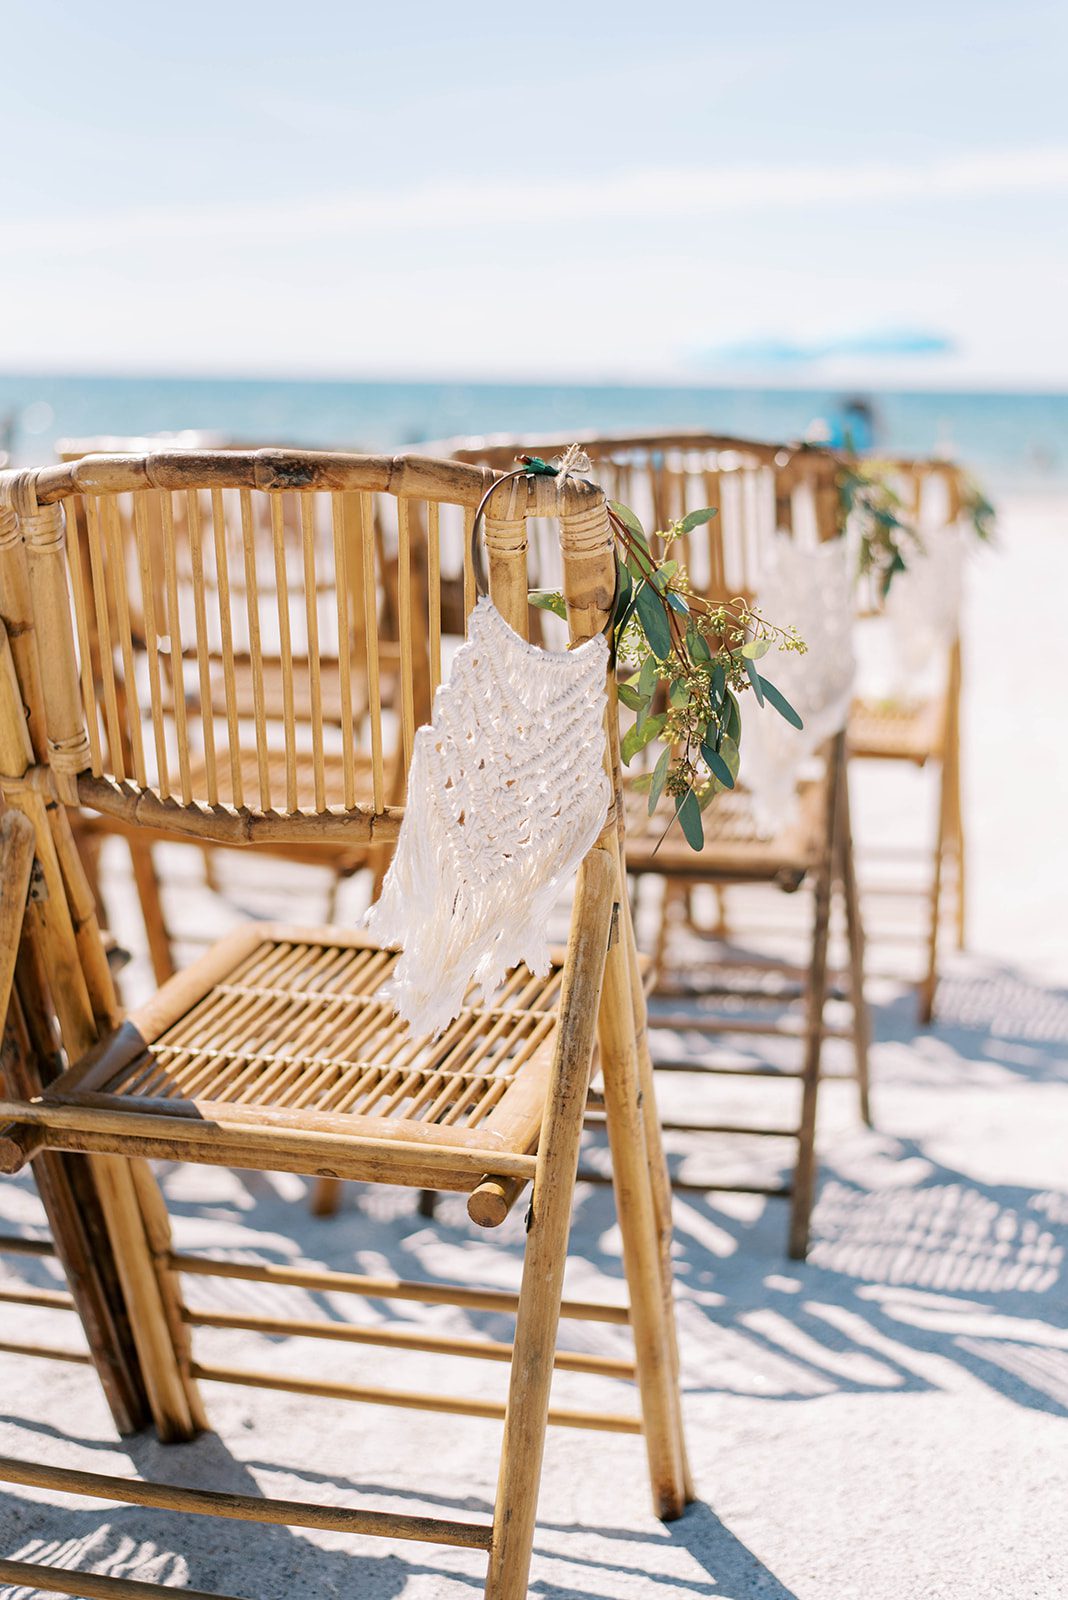 Boho wedding decor with white macramé detail on the chairs at the ceremony